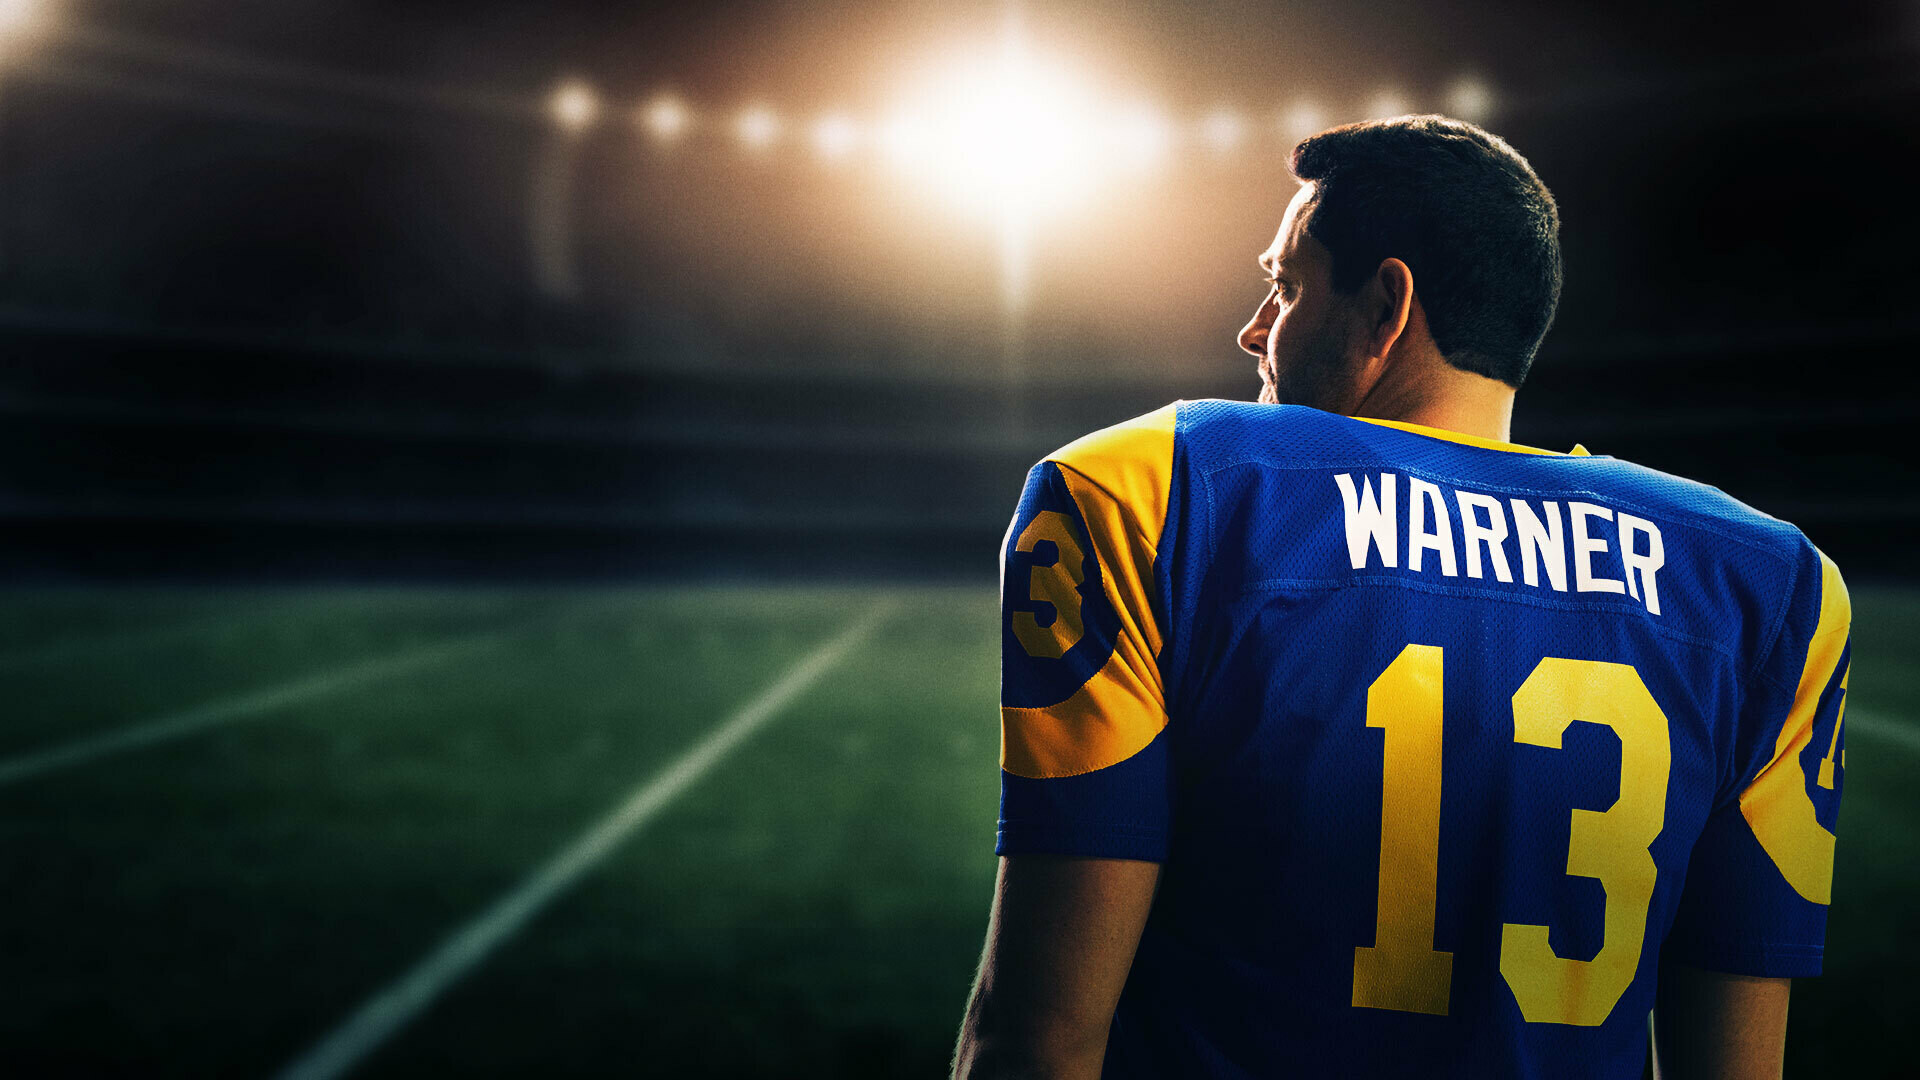 American Underdog: A biopic about Kurt Warner was announced in February 2020, when Andrew and Jon Erwin were hired to direct the film. 1920x1080 Full HD Background.